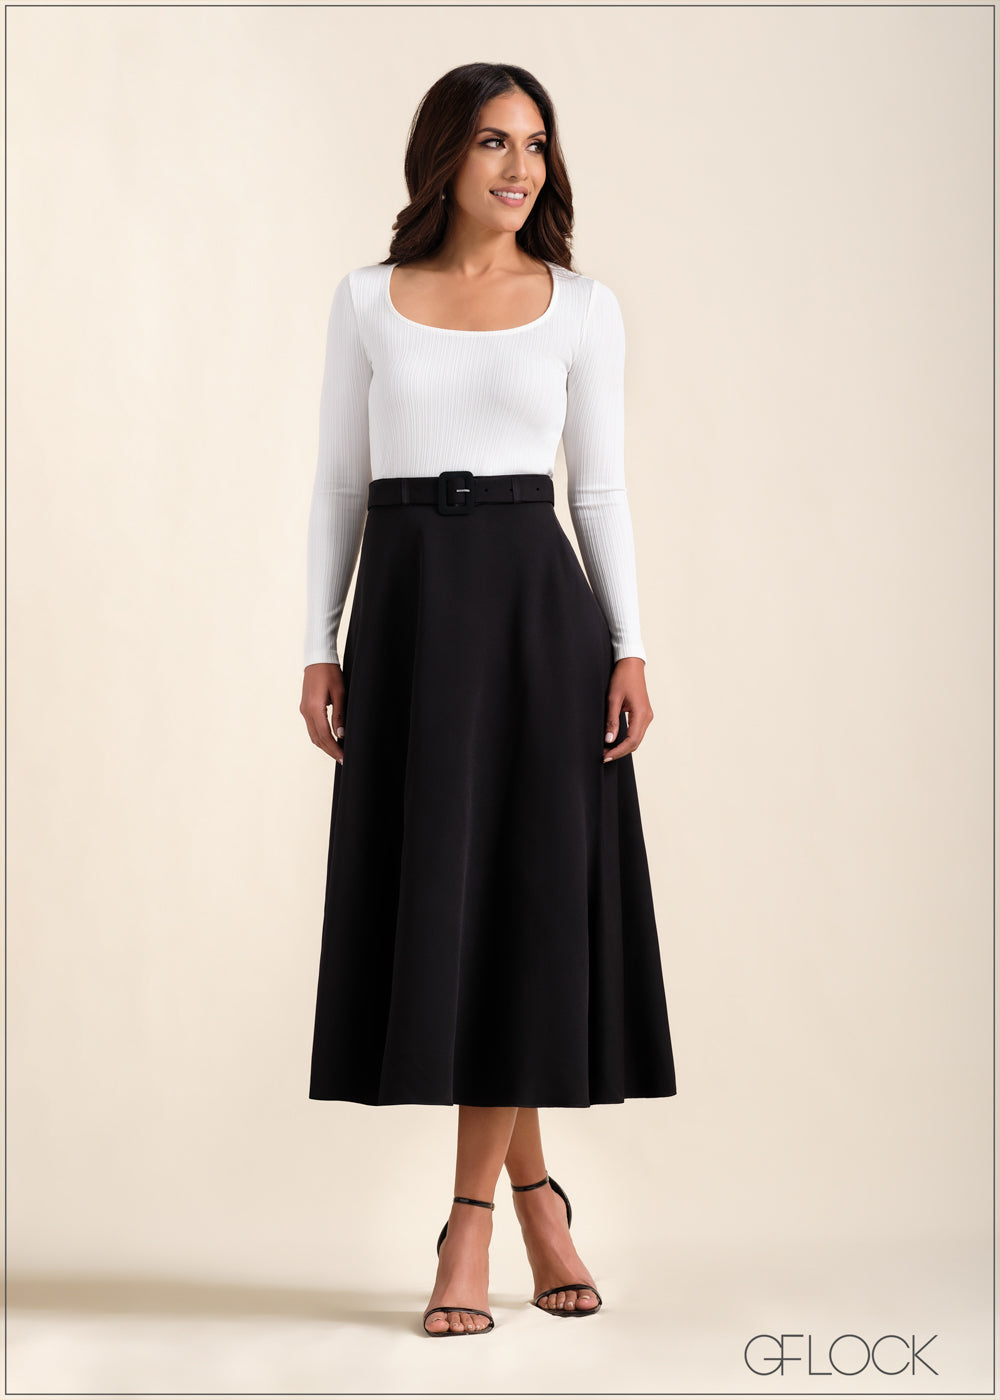 High Waist Midi Skirt + Cropped Sweater - Curves and Confidence